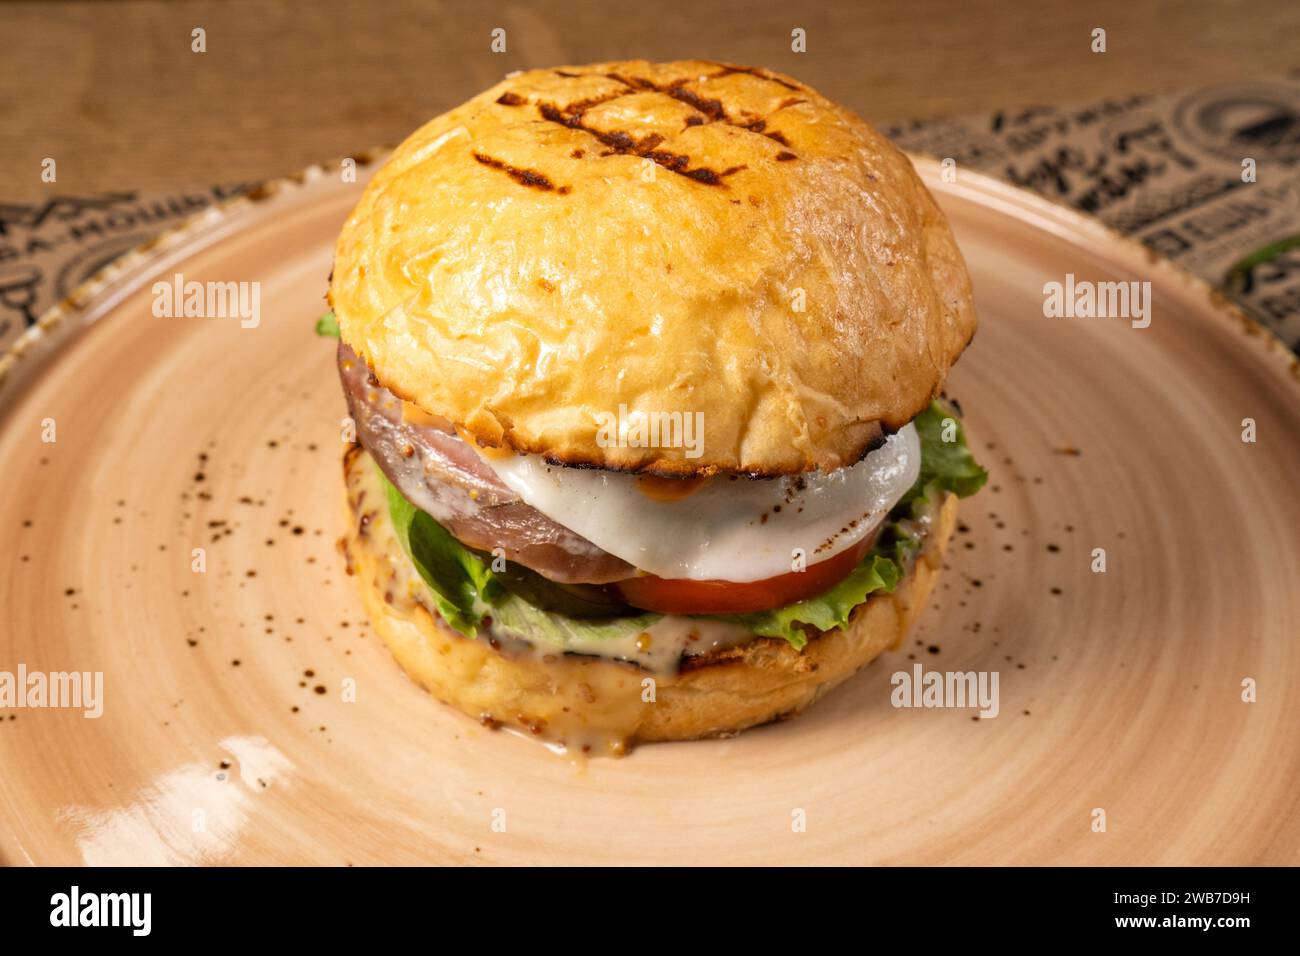 Savory Delight, A Symphony of Flavors in This Gourmet burger Stock Photo